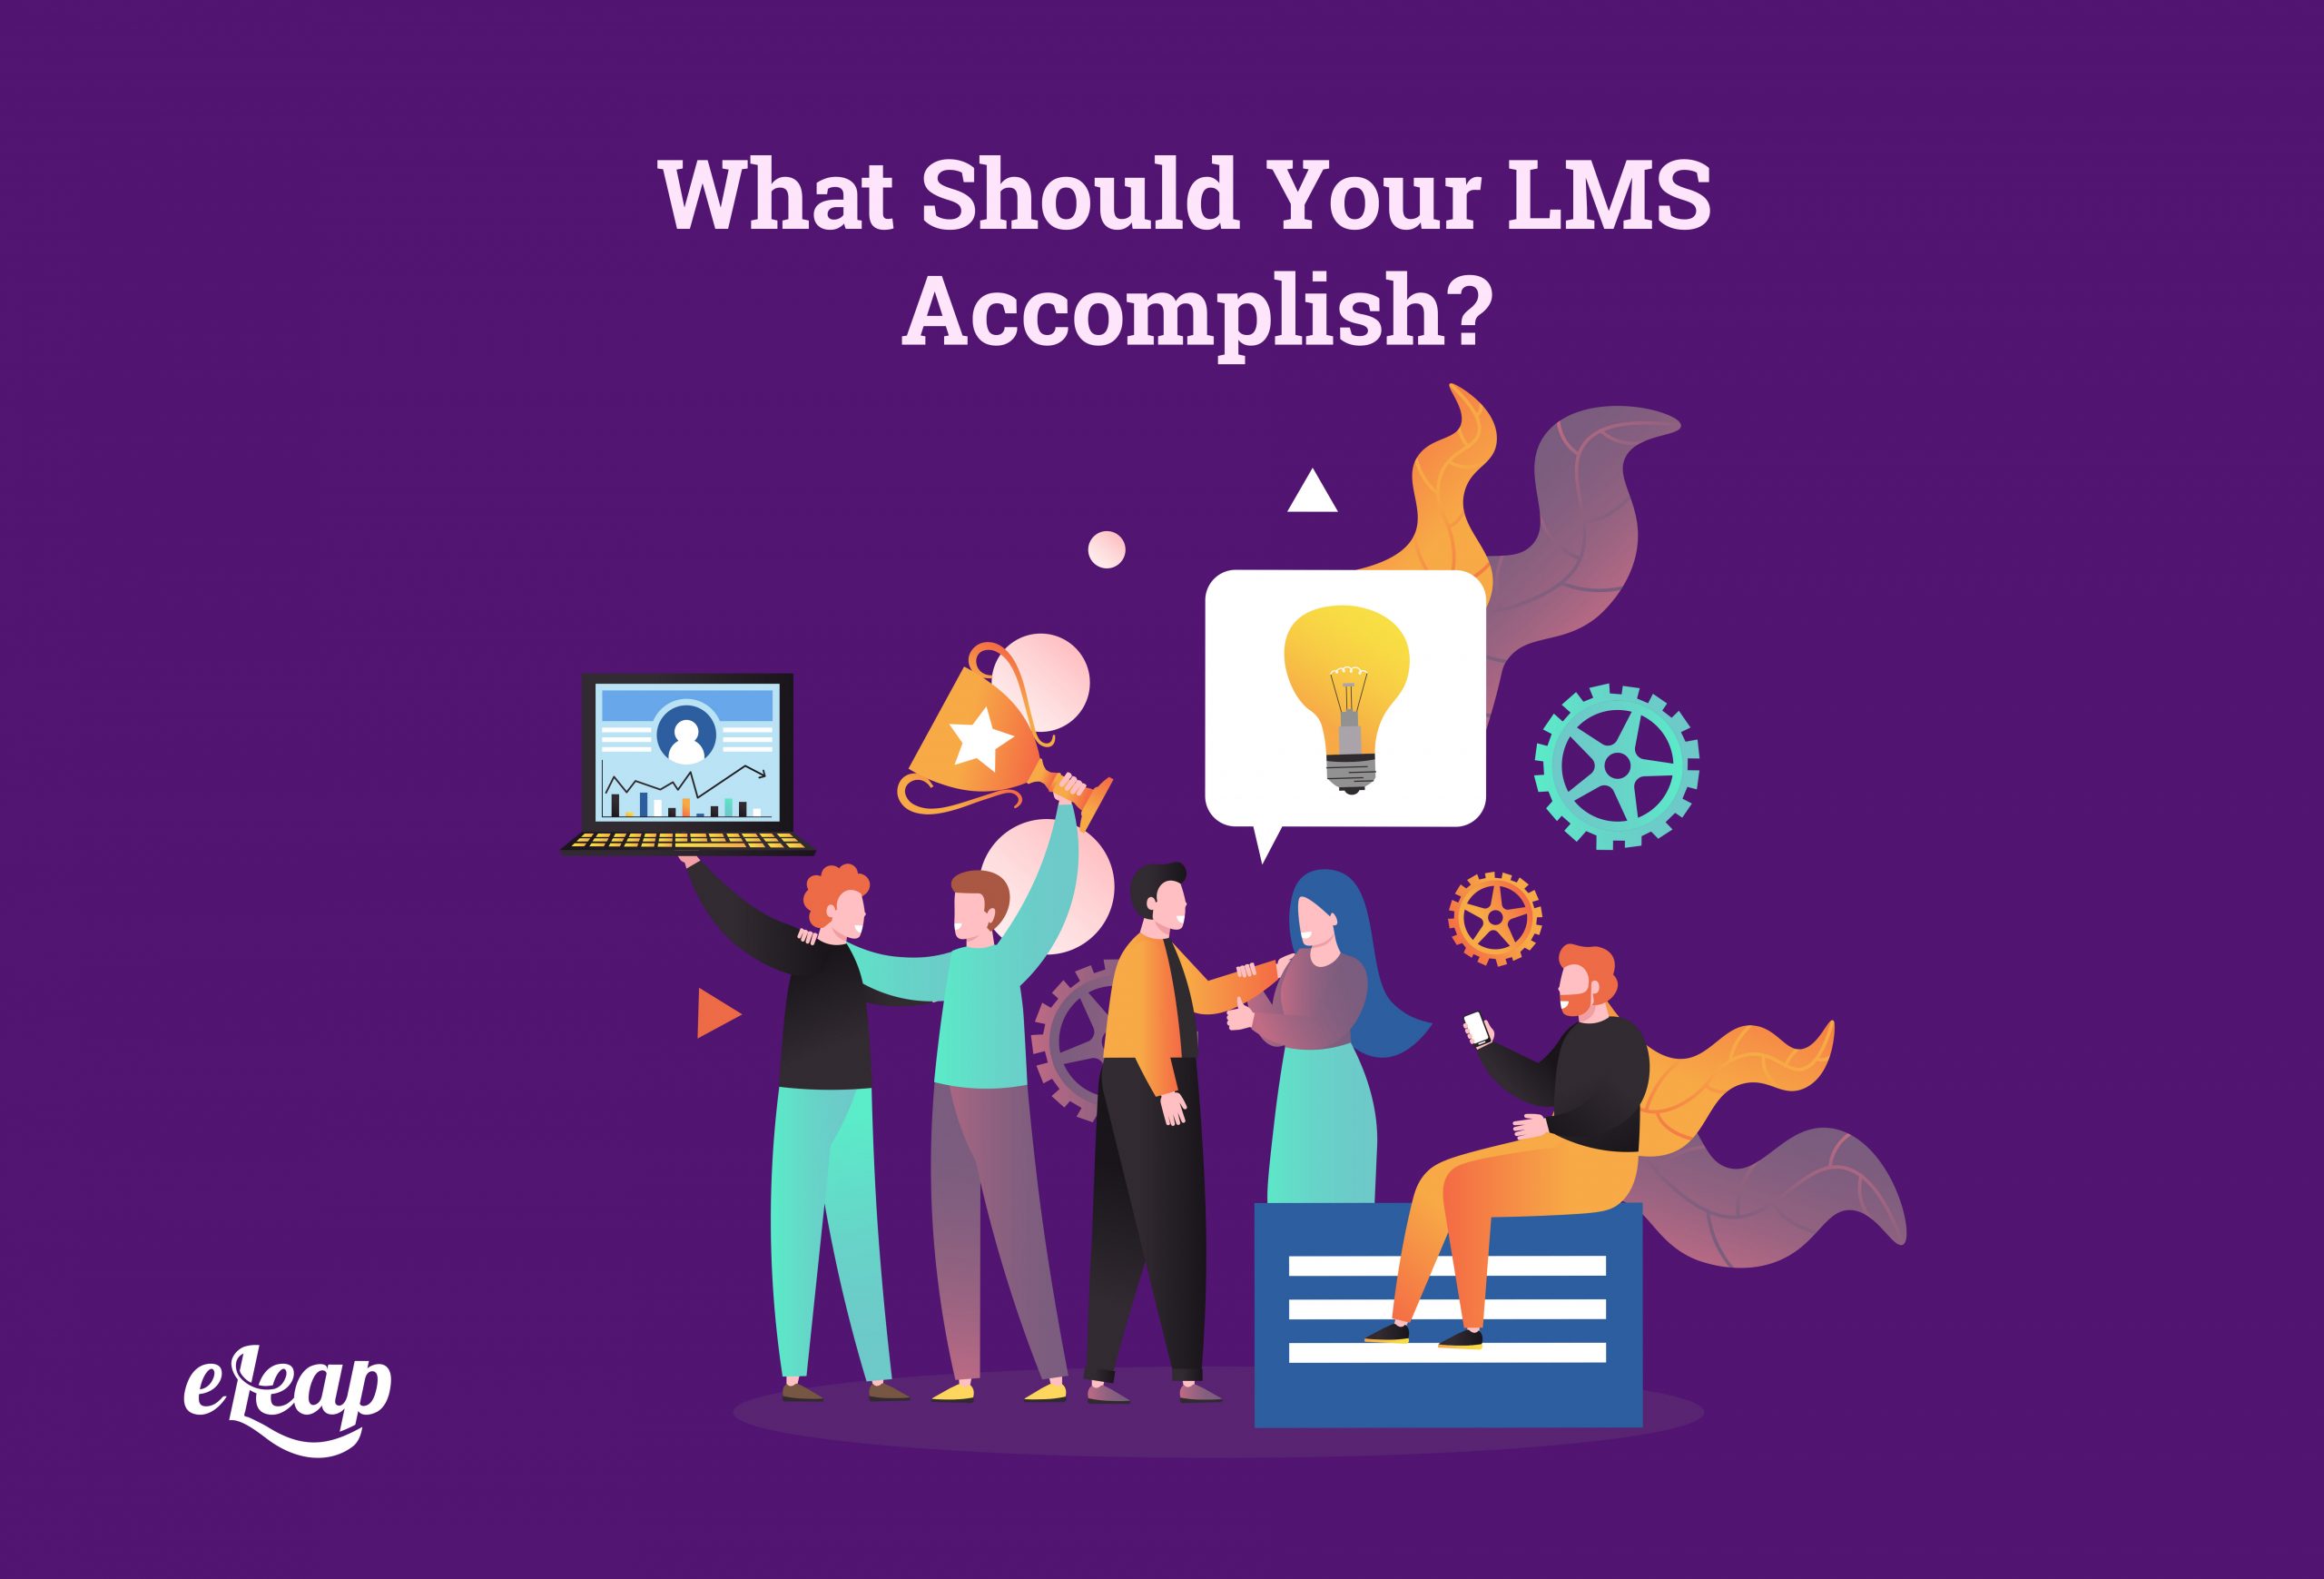 What Should Your LMS Accomplish?